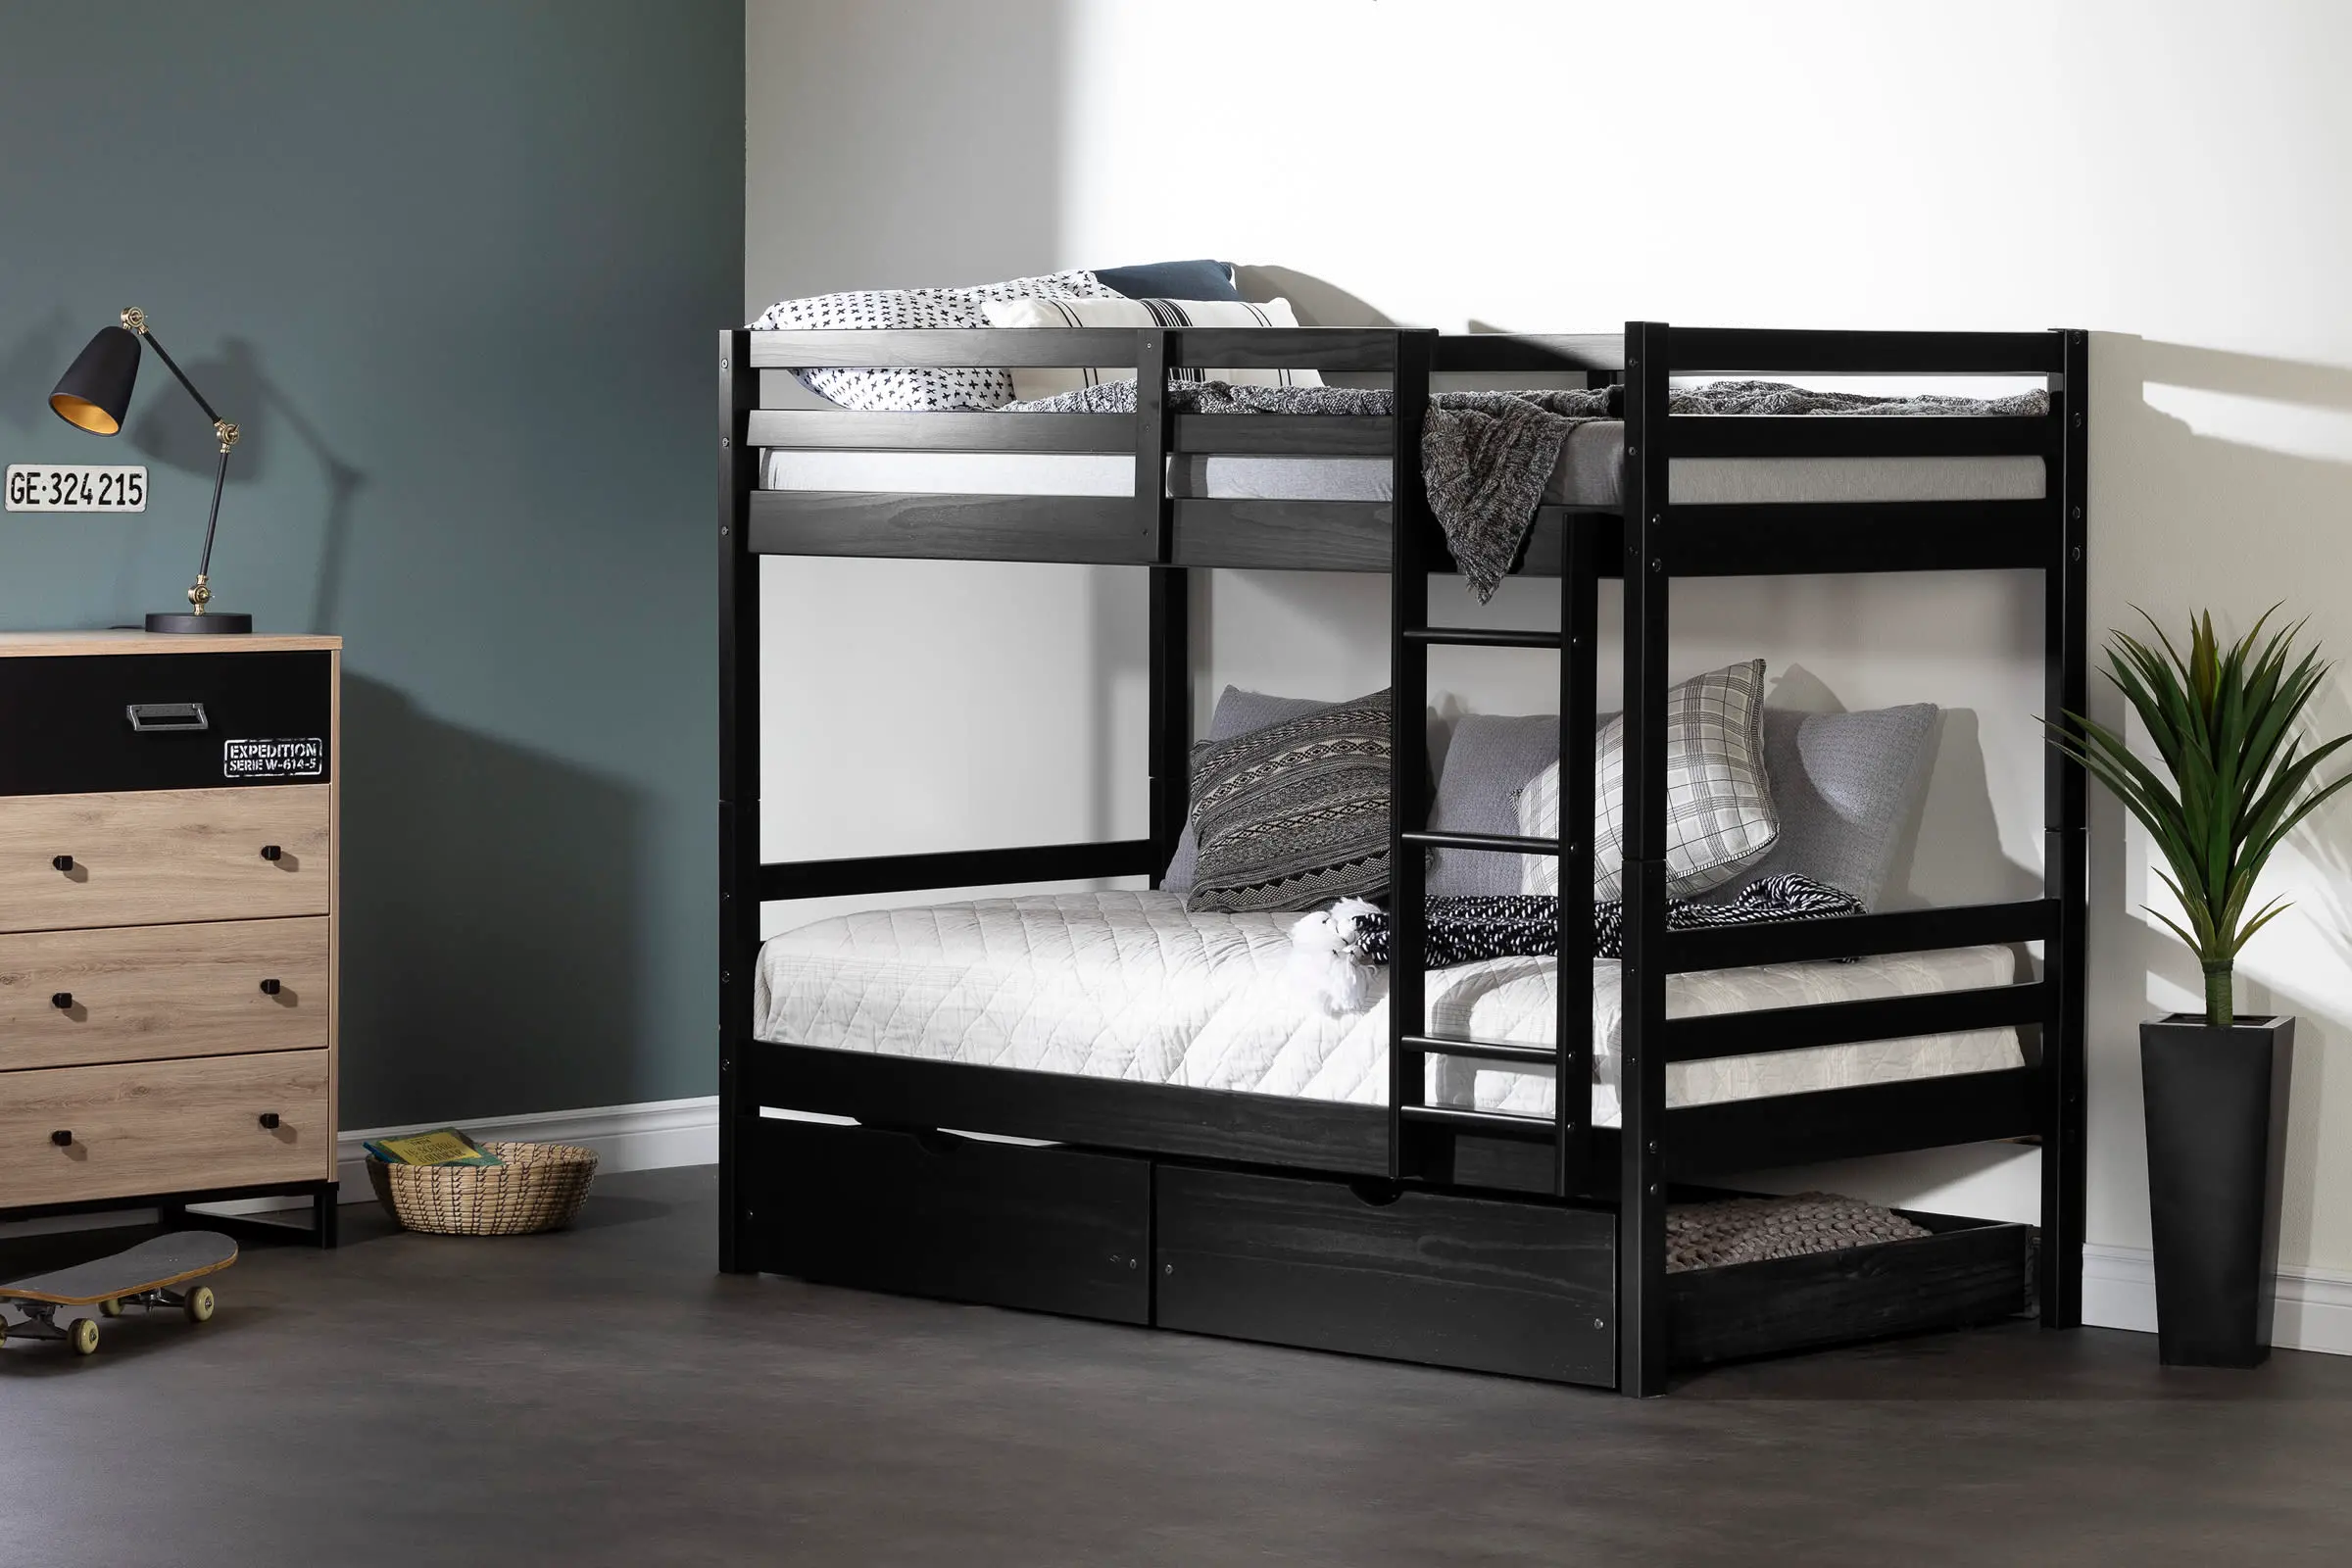 13282 Fakto Black Twin Bunk Beds with Drawers - South Sh sku 13282